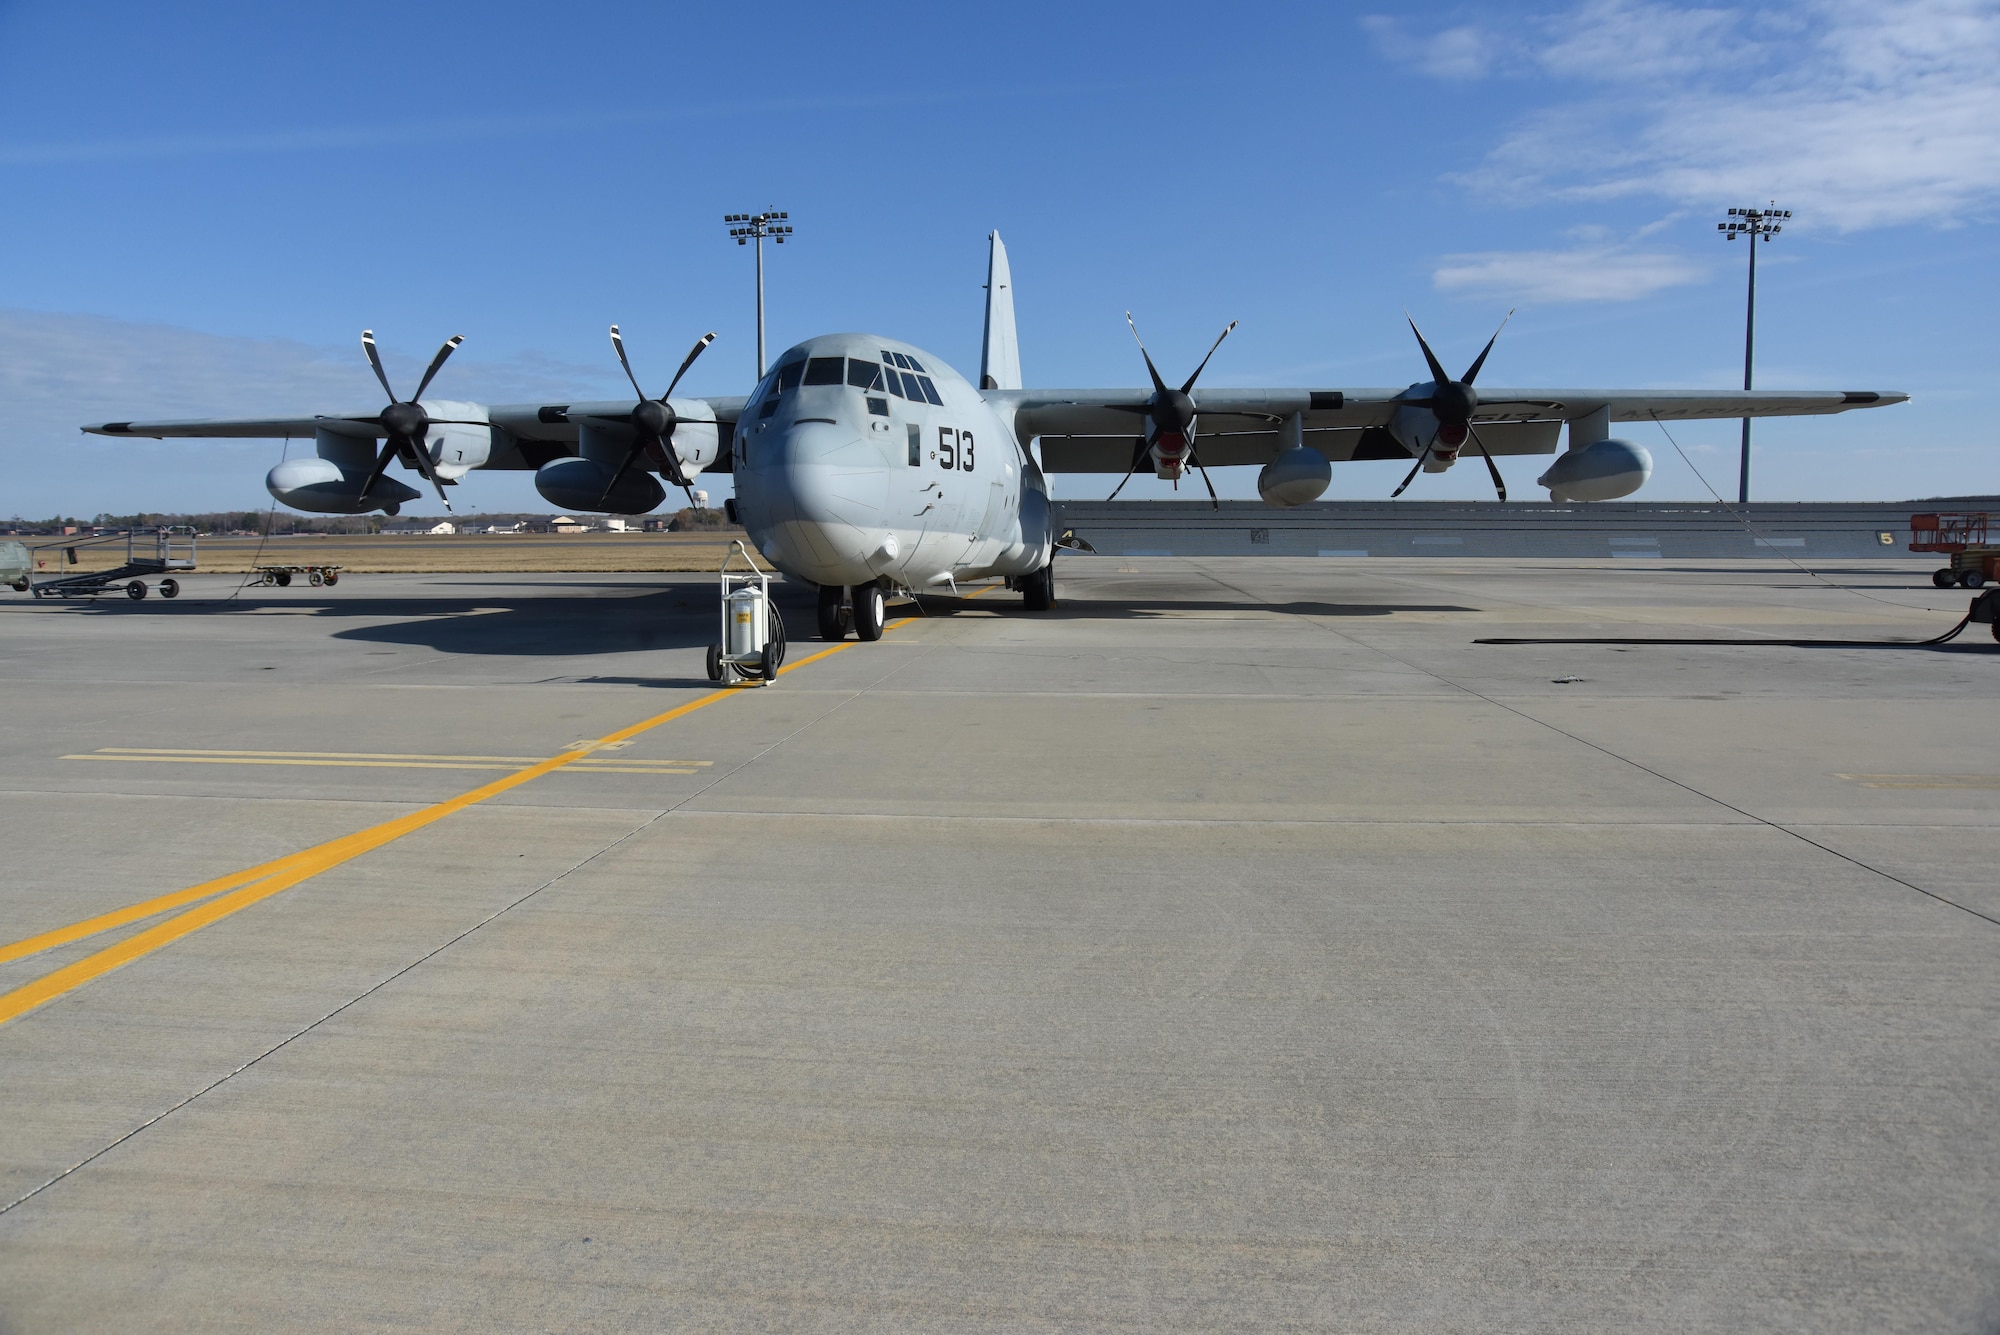 A project to retrofit Large Aircraft Infrared Countermeasures (LAIRCM) Advanced Threat Warning Systems onto the Navy C-130Js arrived at the Warner Robins Air Logistics Complex in fiscal 2016. It was completed ahead of schedule in early fiscal 2017 through the combined efforts of the 559th Aircraft Maintenance Squadron, the unit that performs depot-level maintenance, repair and modification for all C-5 aircraft, and the 560th Aircraft Maintenance Squadron, which does the same for the C-130. (U.S. Air Force Photo by Ed Aspera)
